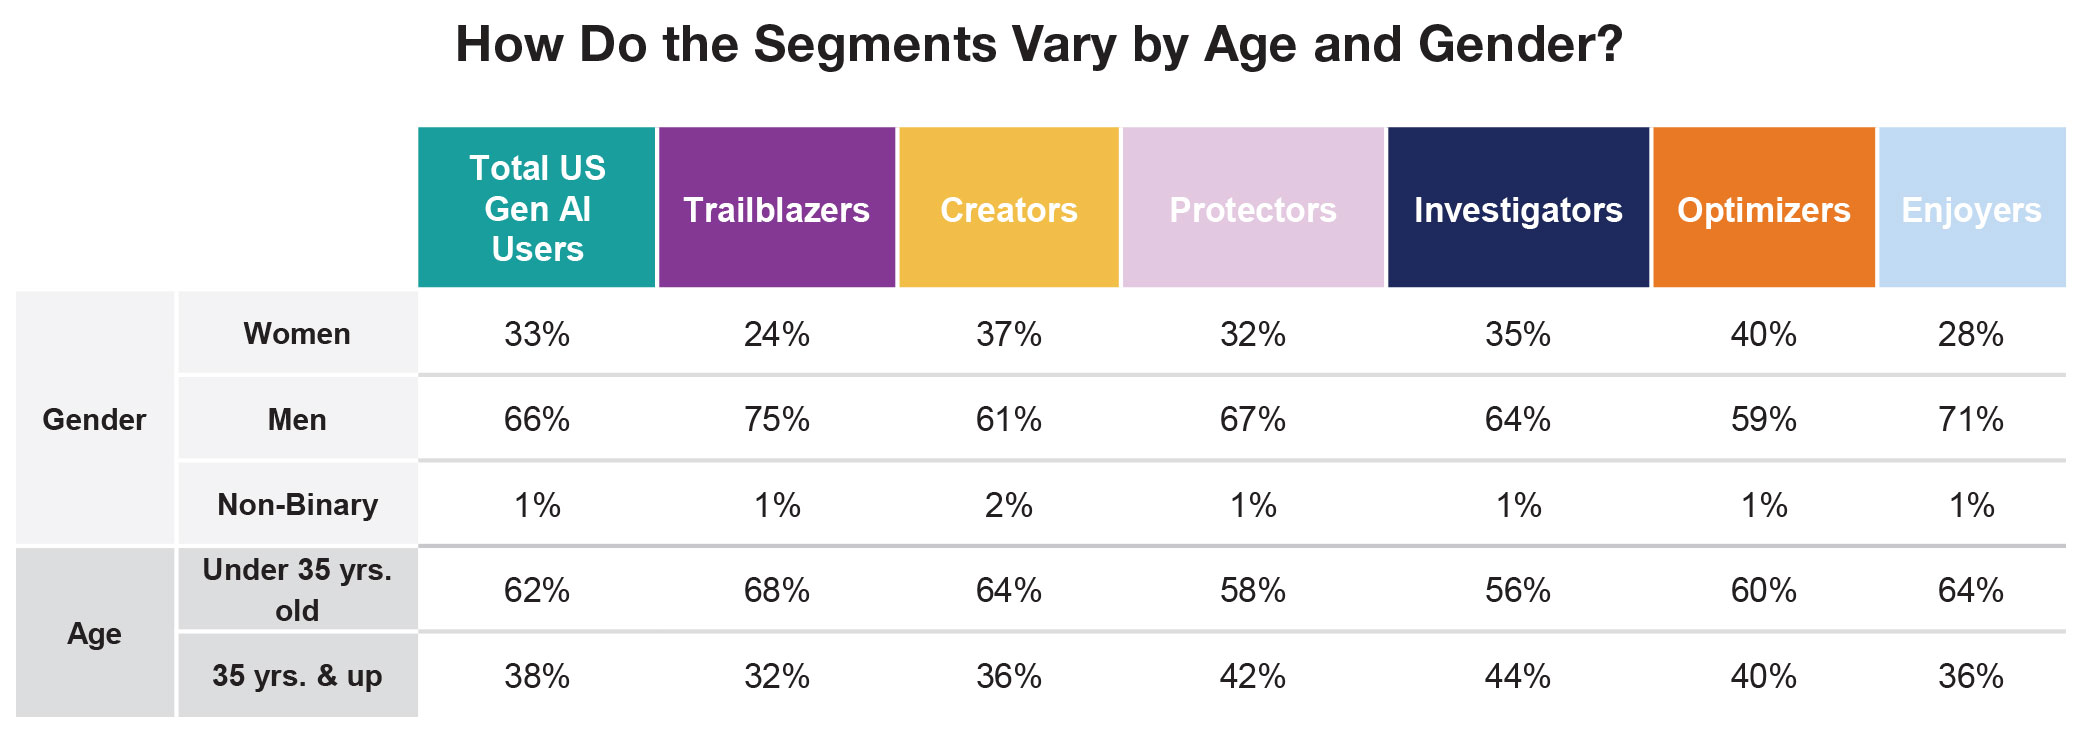 How Do the Segments Vary by Age and Gender?